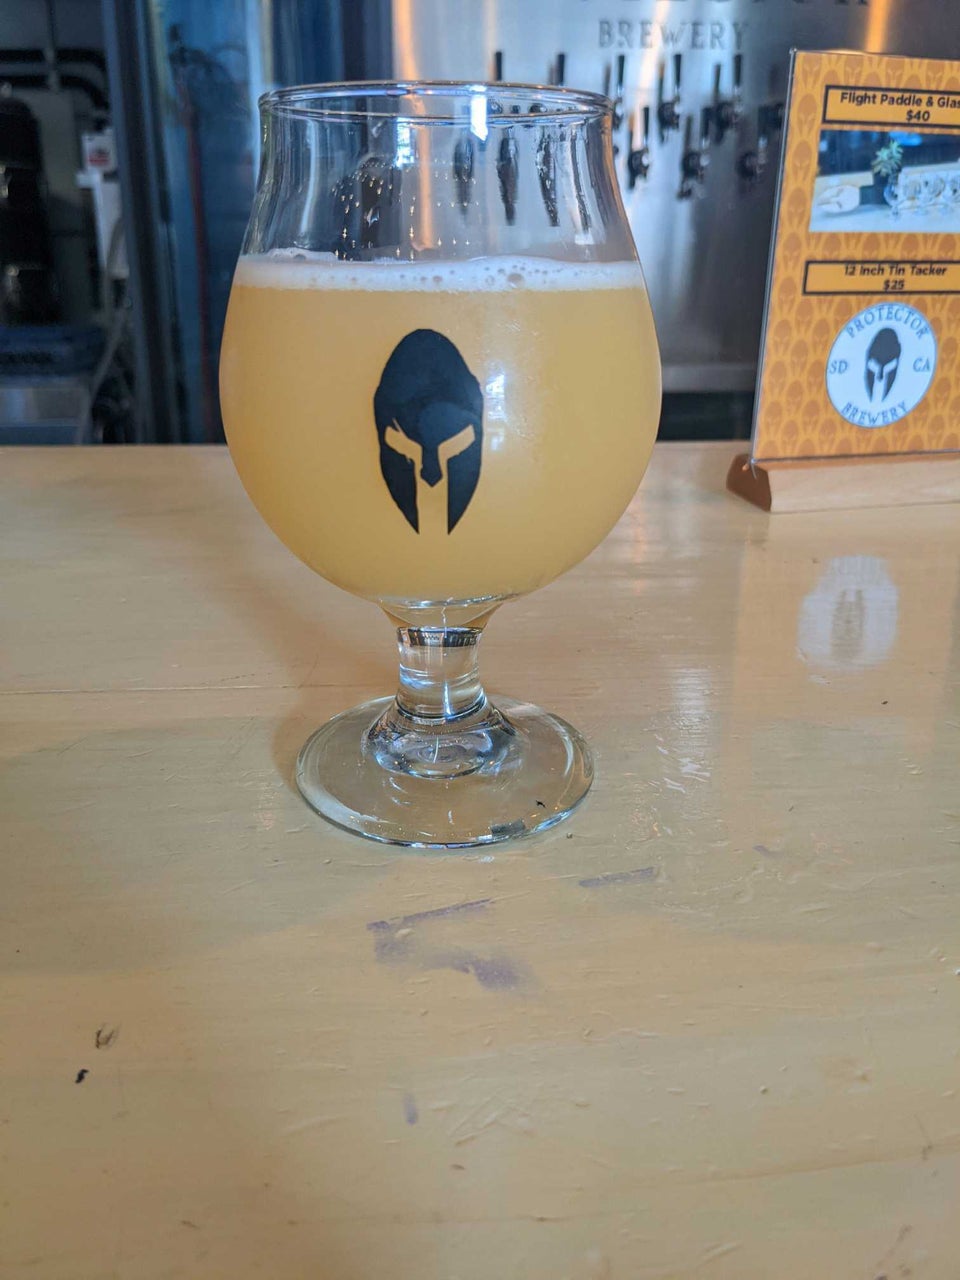 Protector Brewery